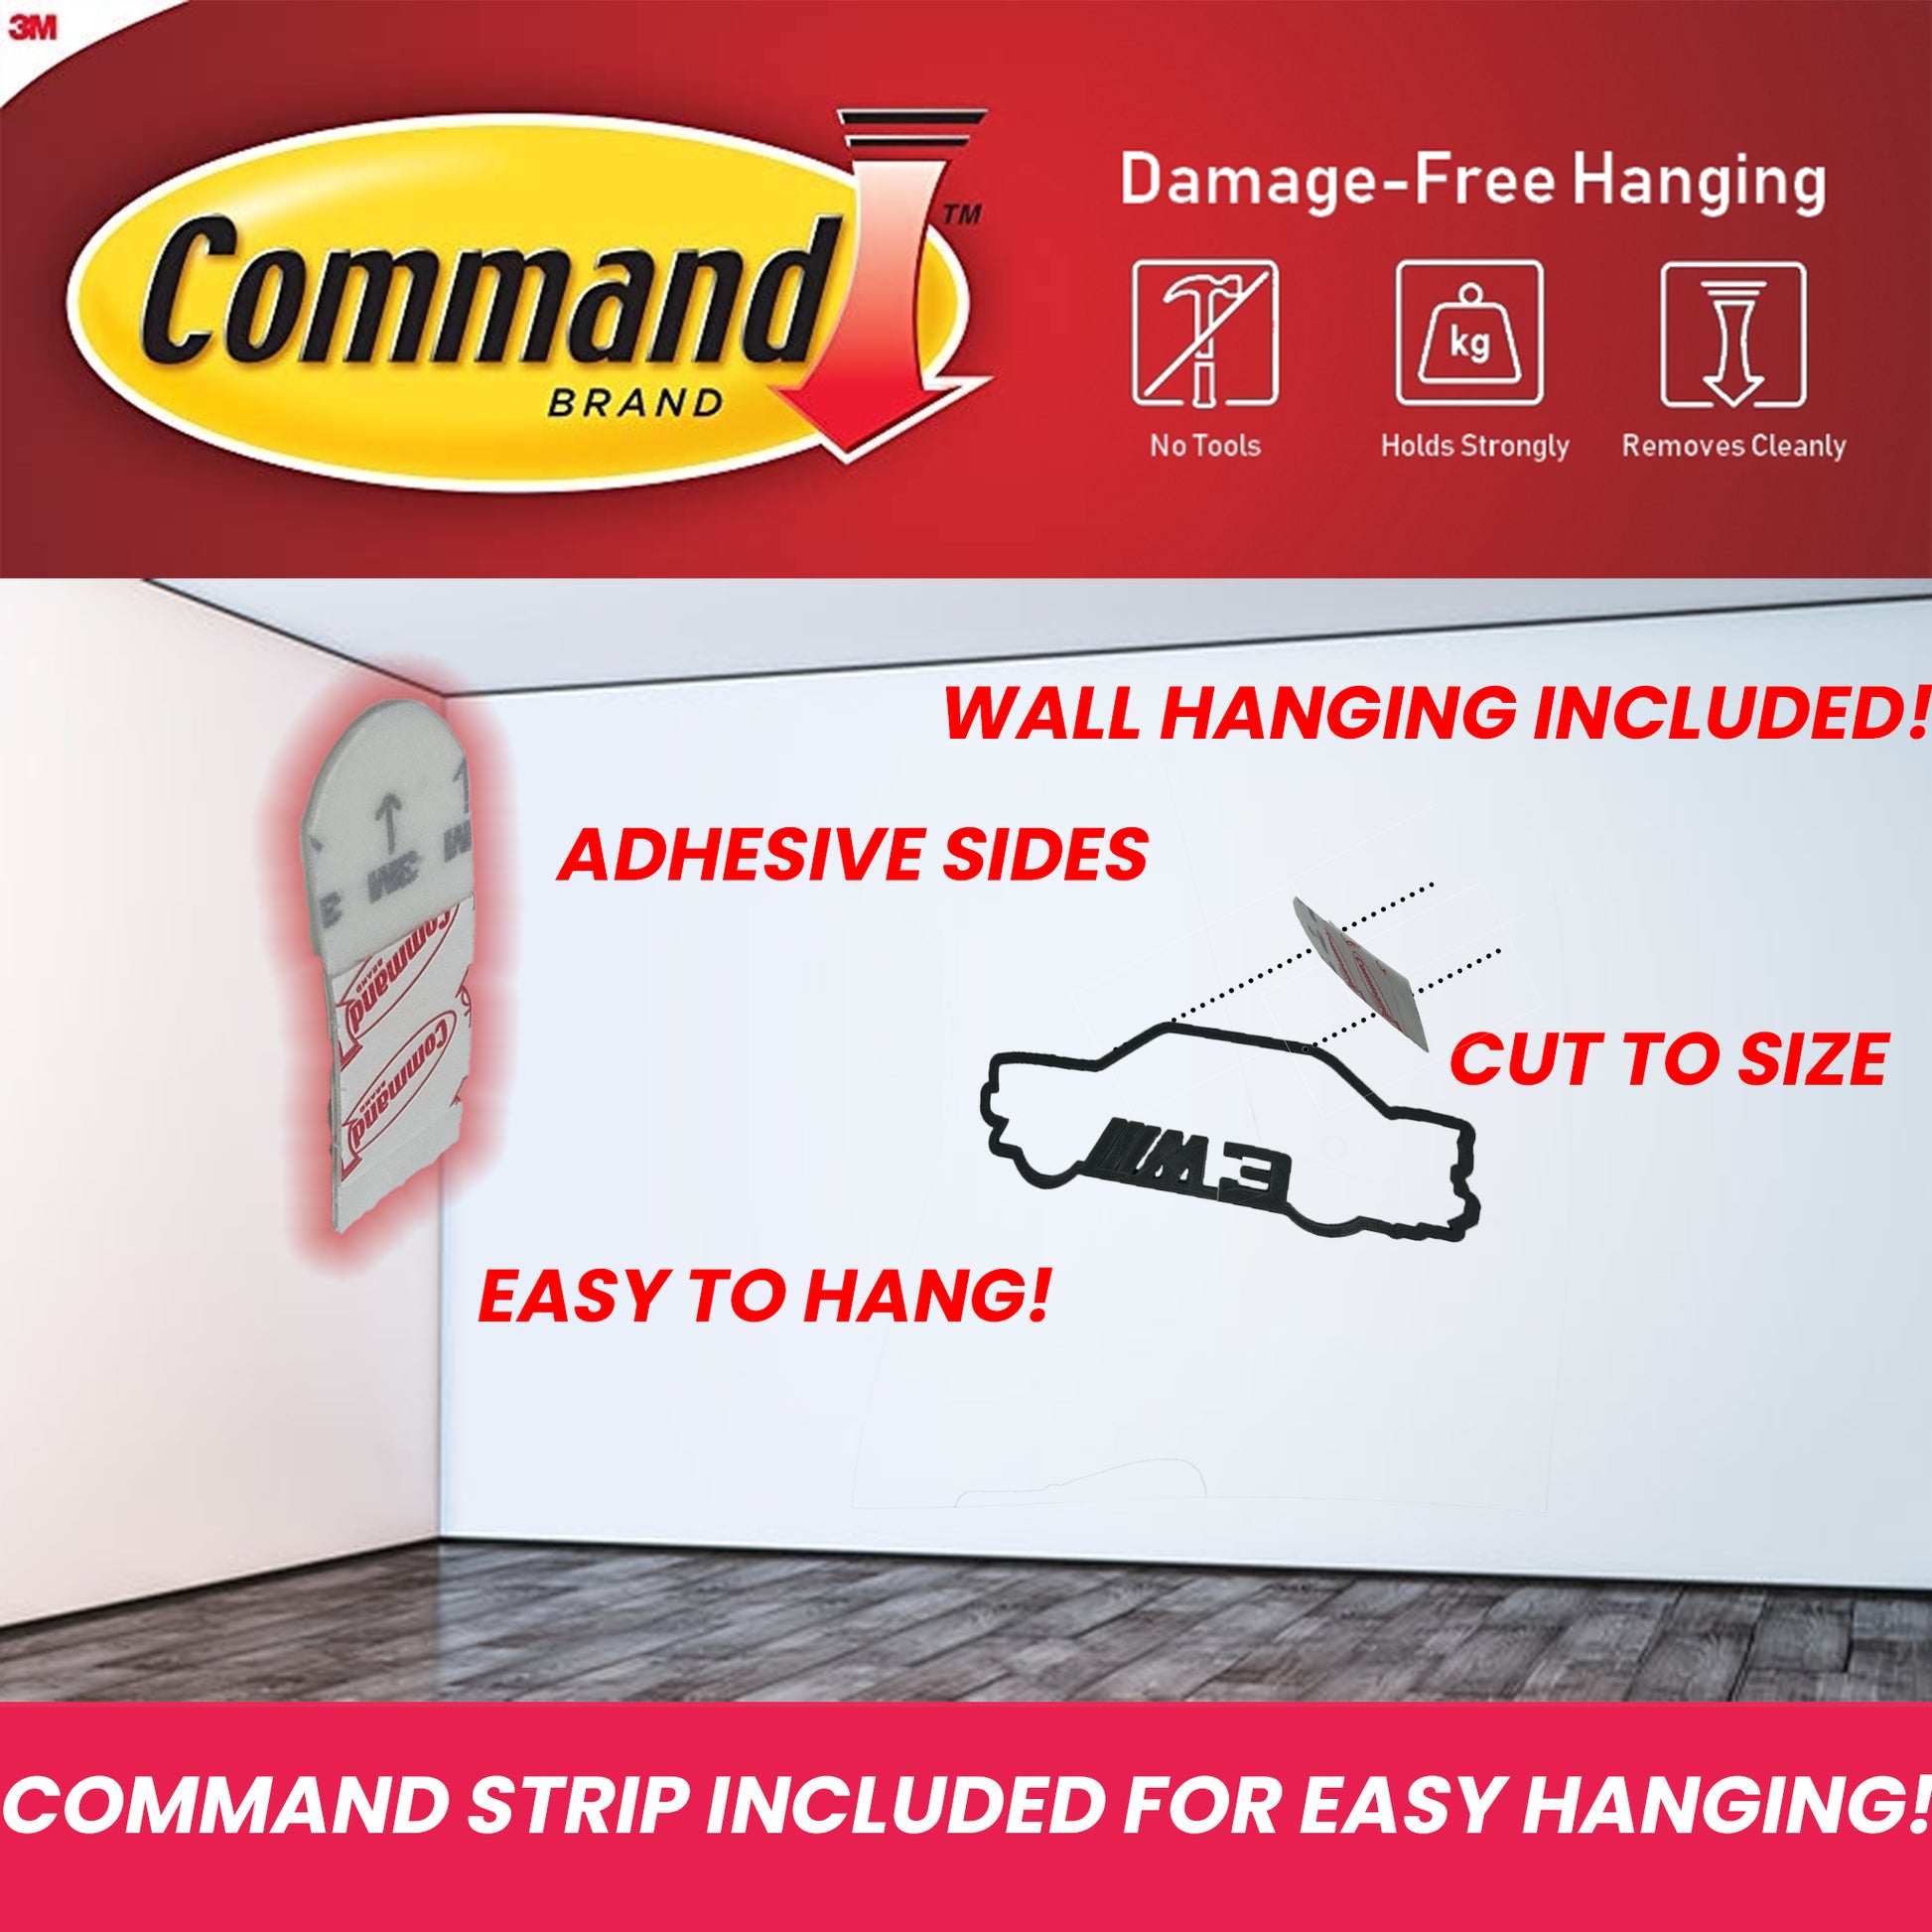 Command strip hanging included